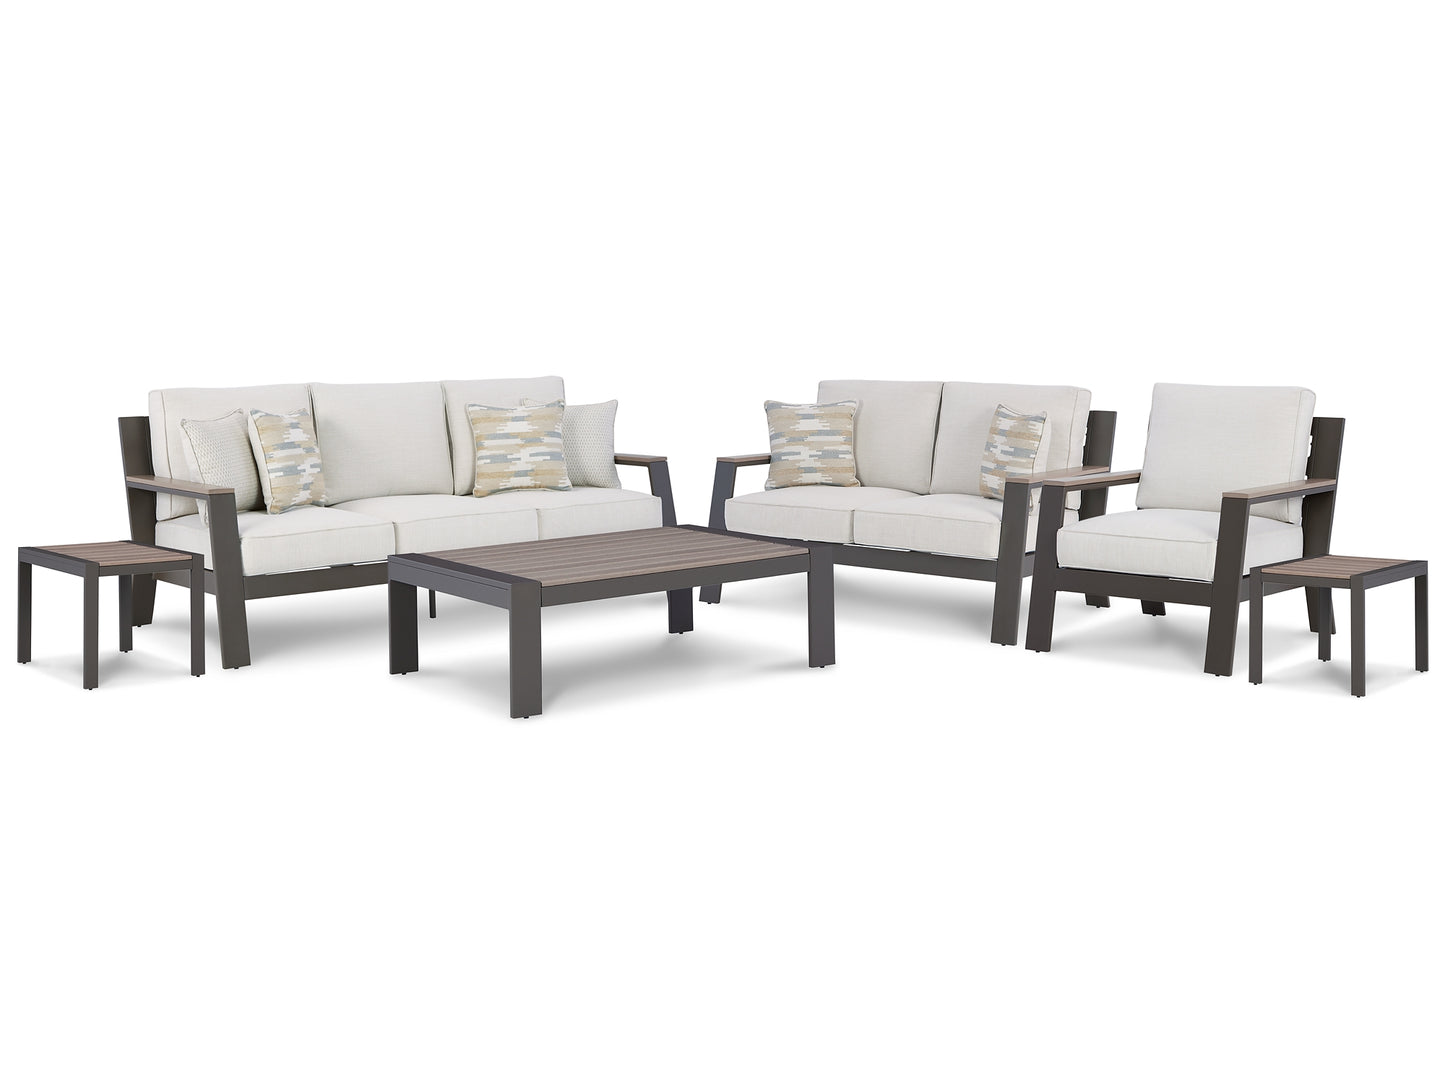 Tropicava Outdoor Sofa, Loveseat and 2 Lounge Chairs with Coffee Table and 2 End Tables